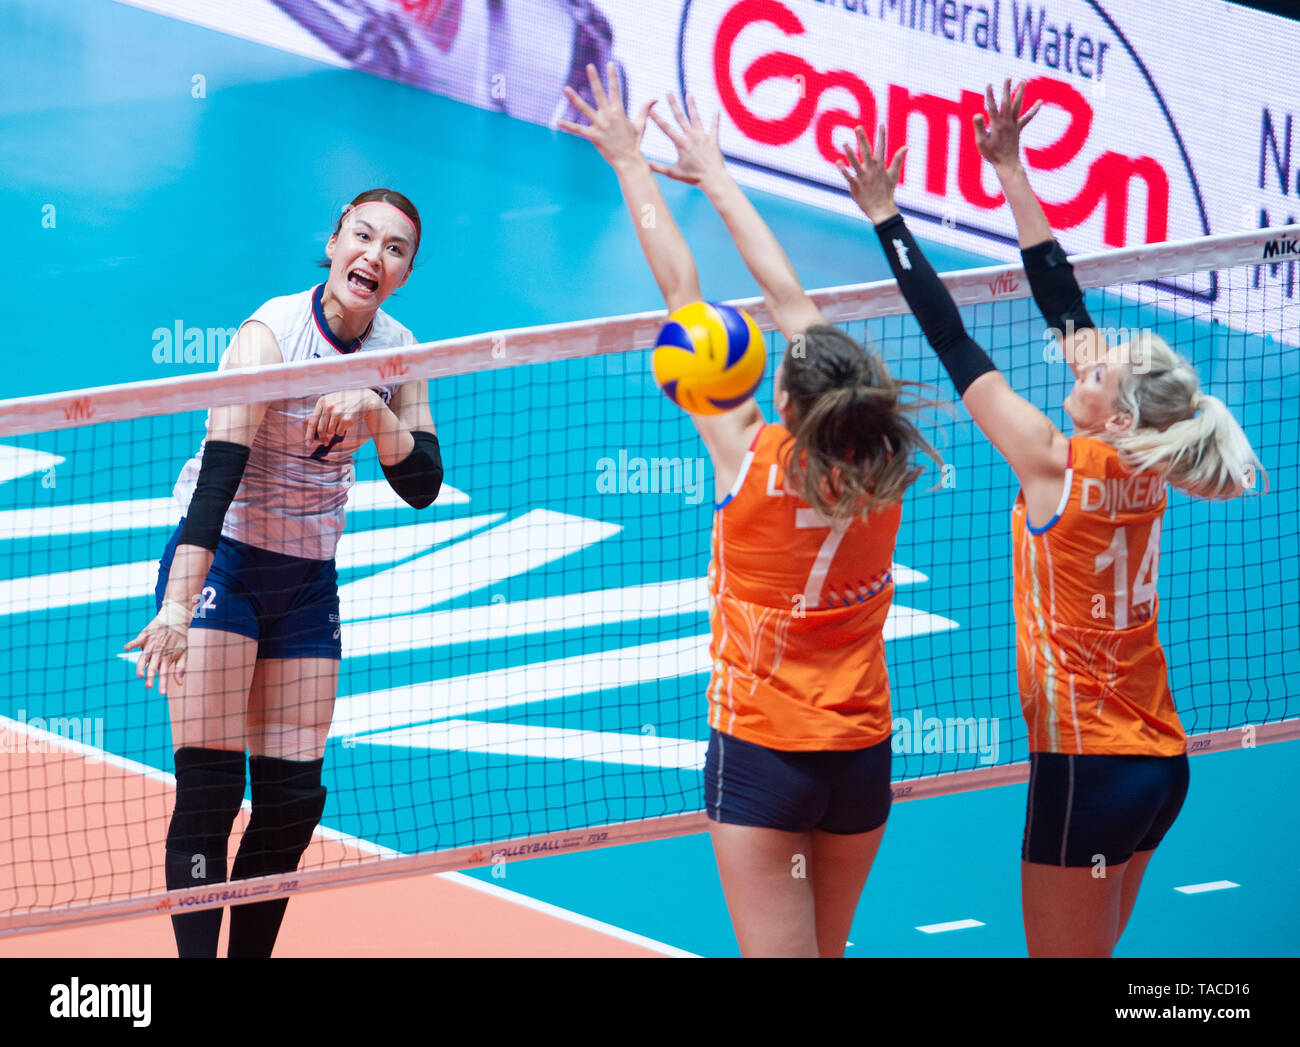 Belgrade, Serbia. 23rd May, 2019. South Korea's Pyo Seungju (L) spikes  during the 2019 FIVB Volleyball Nations League women's game between the  Netherlands and South Korea in Belgrade, Serbia, May 23, 2019.